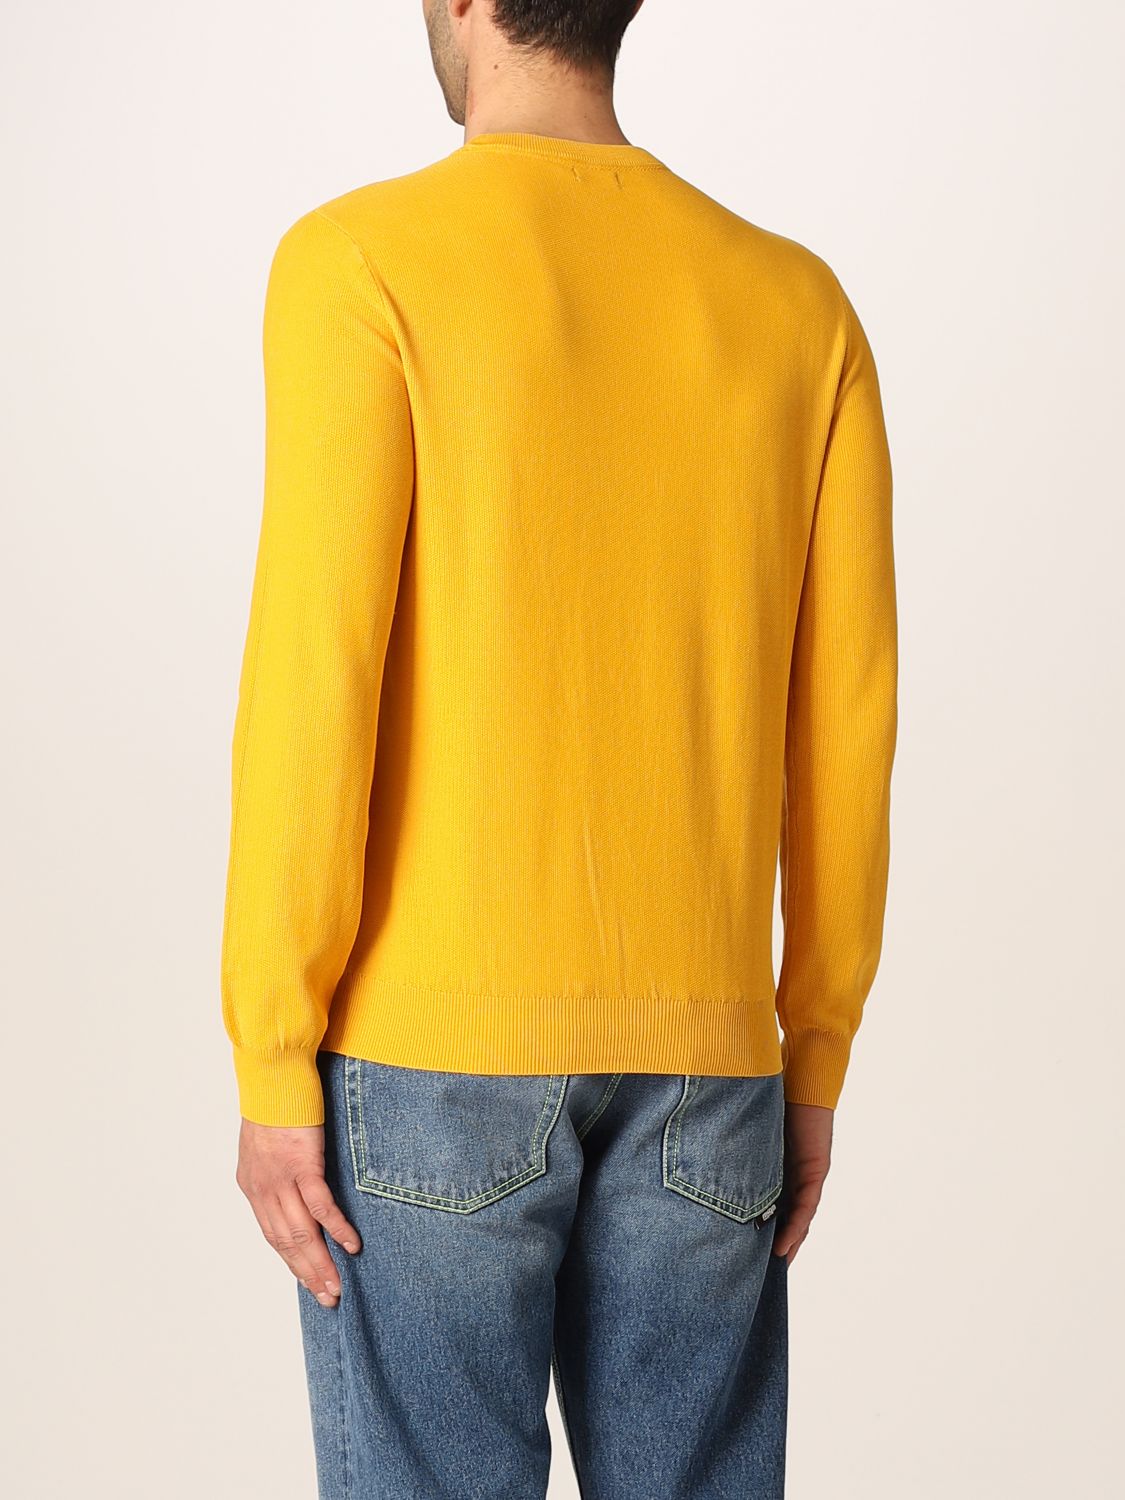 Sun 68 Outlet: sweater for man - Yellow | Sun 68 sweater K32115 online